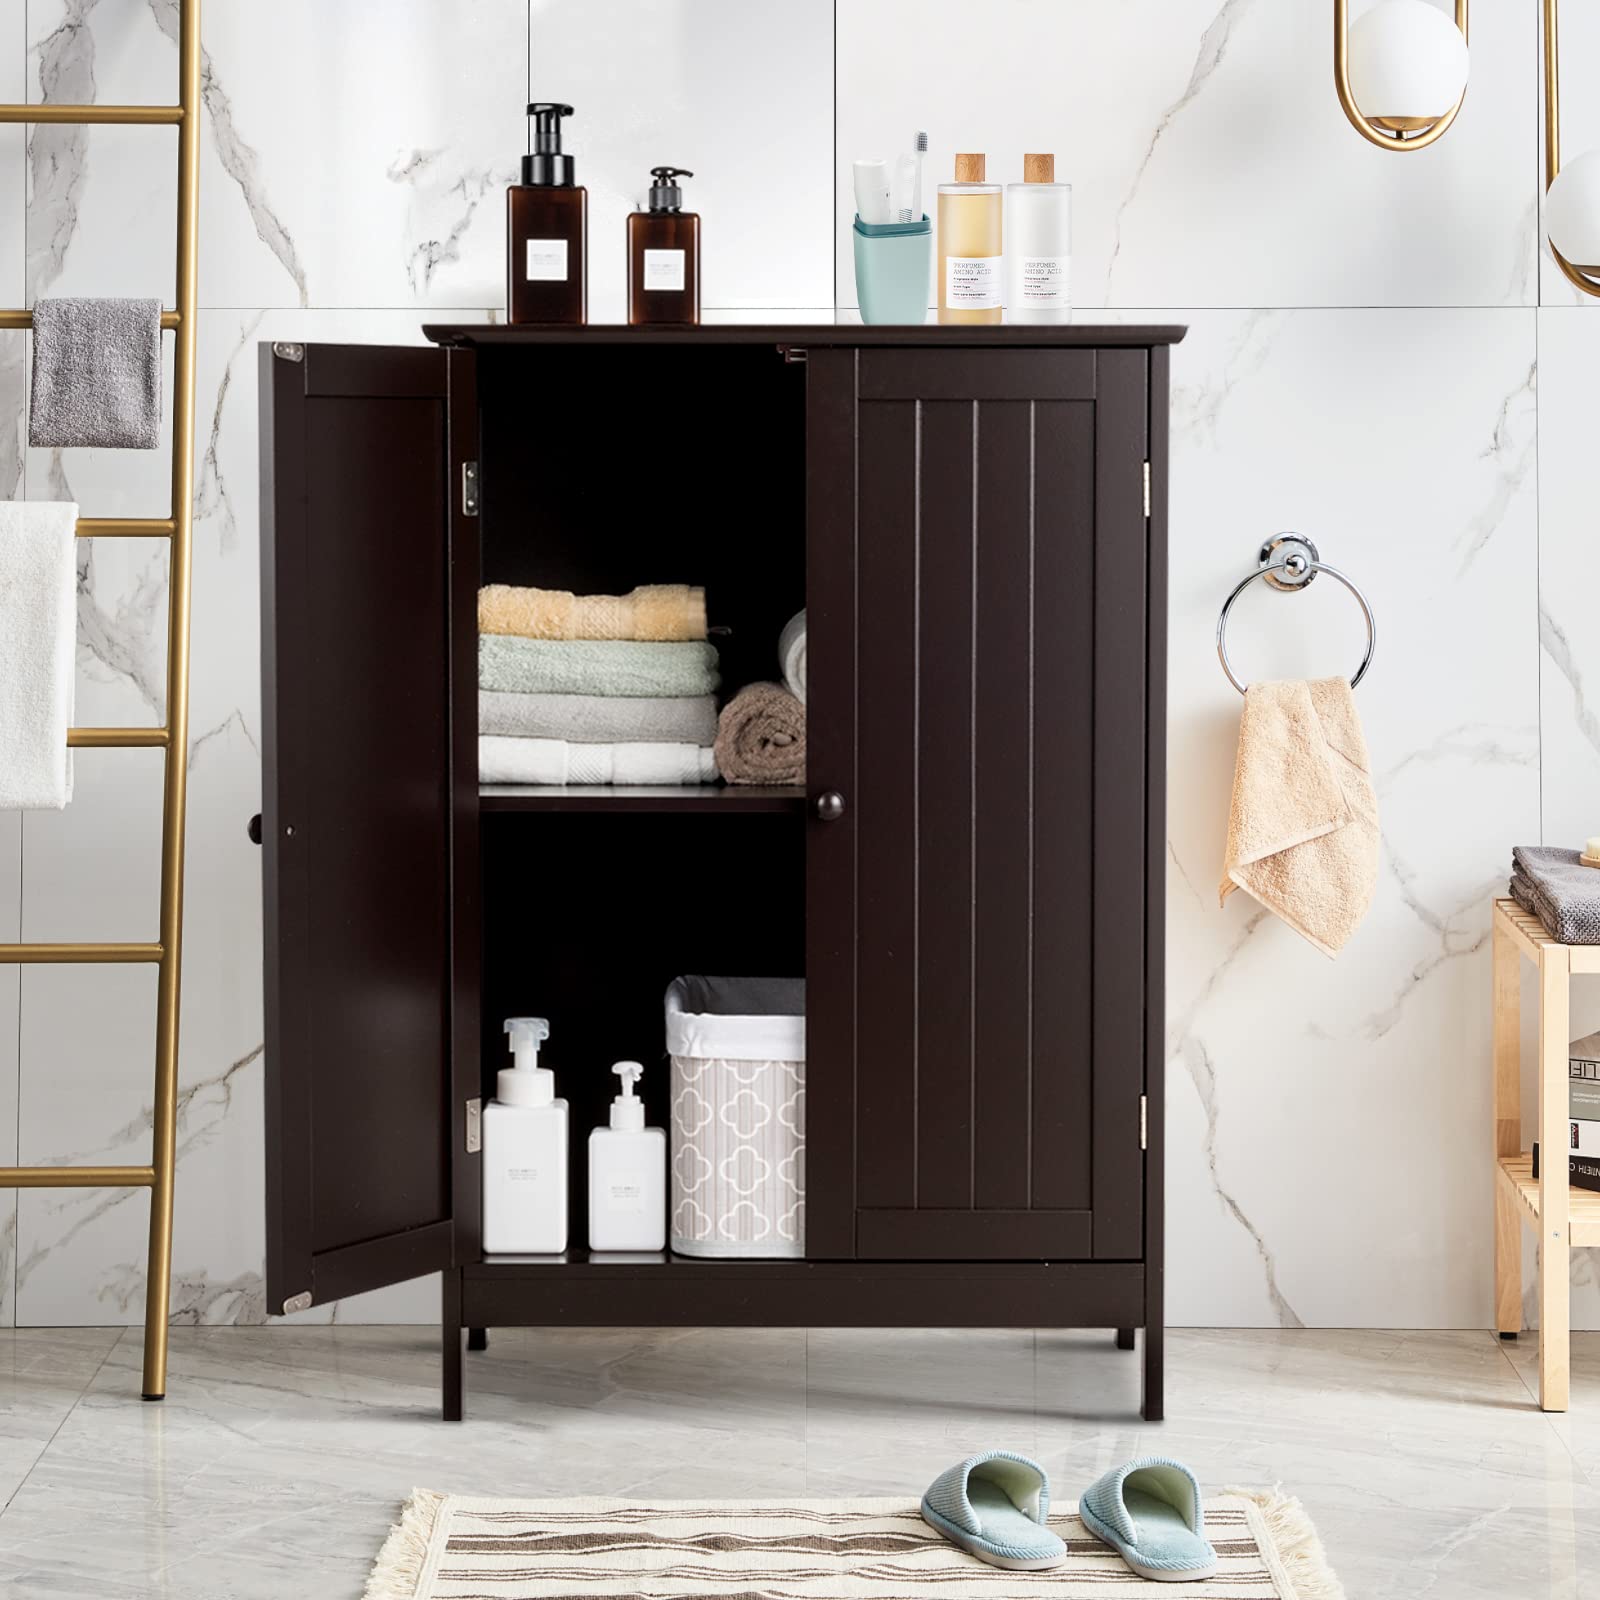 Giantex Storage Cabinet with Doors and Shelves - Freestanding Storage Organizer with Anti-Tipping Device